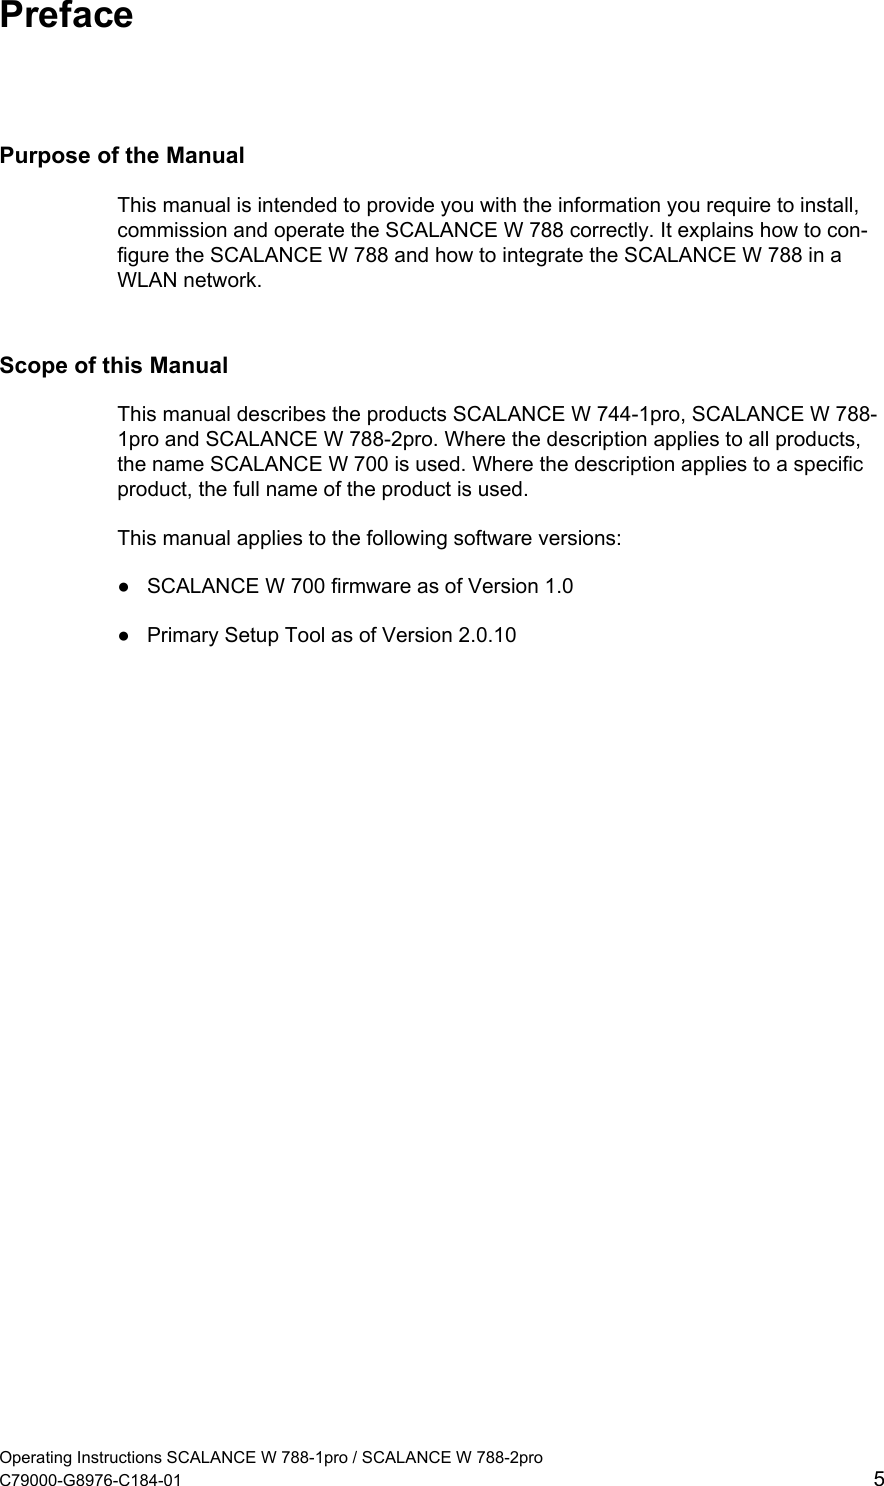  Preface Purpose of the Manual This manual is intended to provide you with the information you require to install, commission and operate the SCALANCE W 788 correctly. It explains how to con-figure the SCALANCE W 788 and how to integrate the SCALANCE W 788 in a WLAN network. Scope of this Manual This manual describes the products SCALANCE W 744-1pro, SCALANCE W 788-1pro and SCALANCE W 788-2pro. Where the description applies to all products, the name SCALANCE W 700 is used. Where the description applies to a specific product, the full name of the product is used. This manual applies to the following software versions:  ●  SCALANCE W 700 firmware as of Version 1.0 ●  Primary Setup Tool as of Version 2.0.10 Operating Instructions SCALANCE W 788-1pro / SCALANCE W 788-2pro C79000-G8976-C184-01  5 